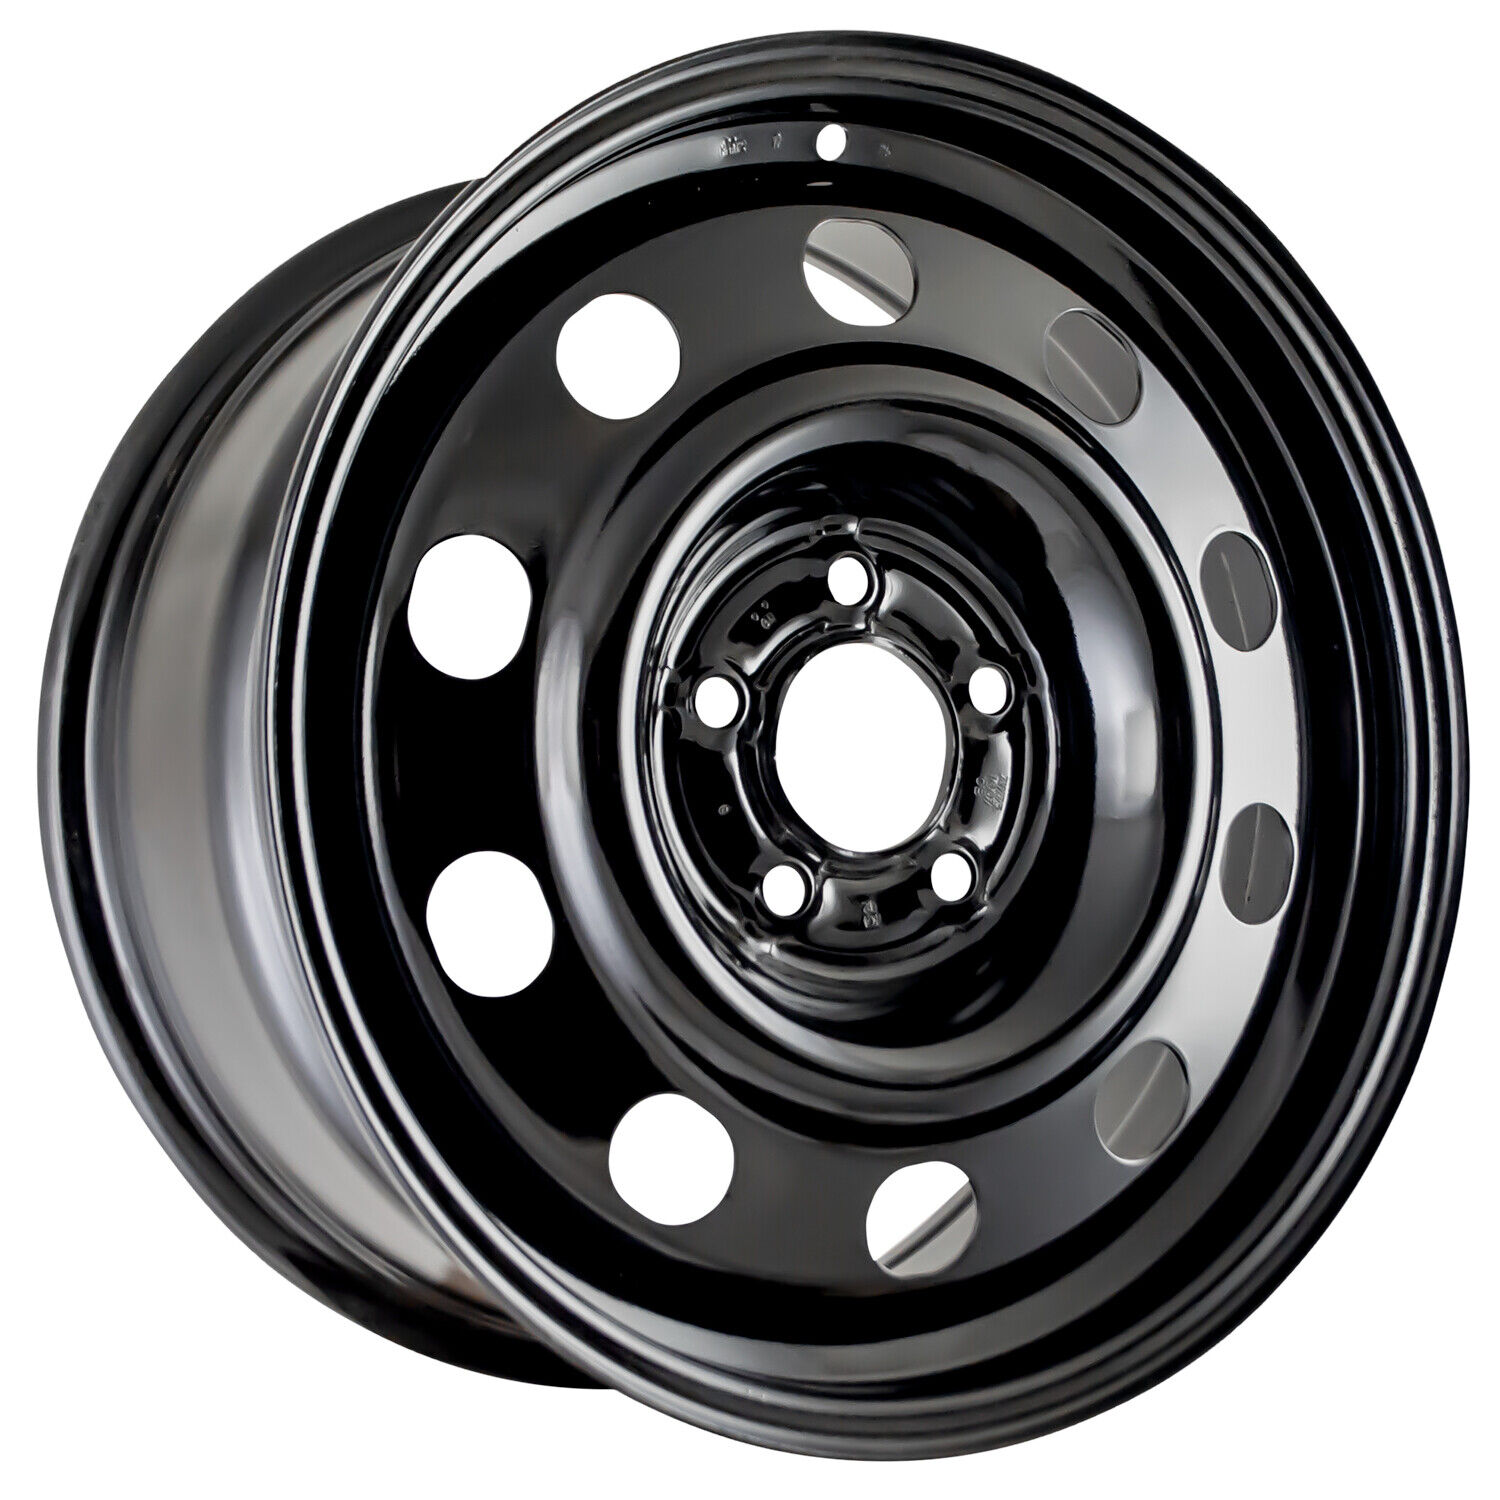 03670 New Replacement 17x7.5 Black Steel Wheel Fits 2006-2011 Crown Victoria